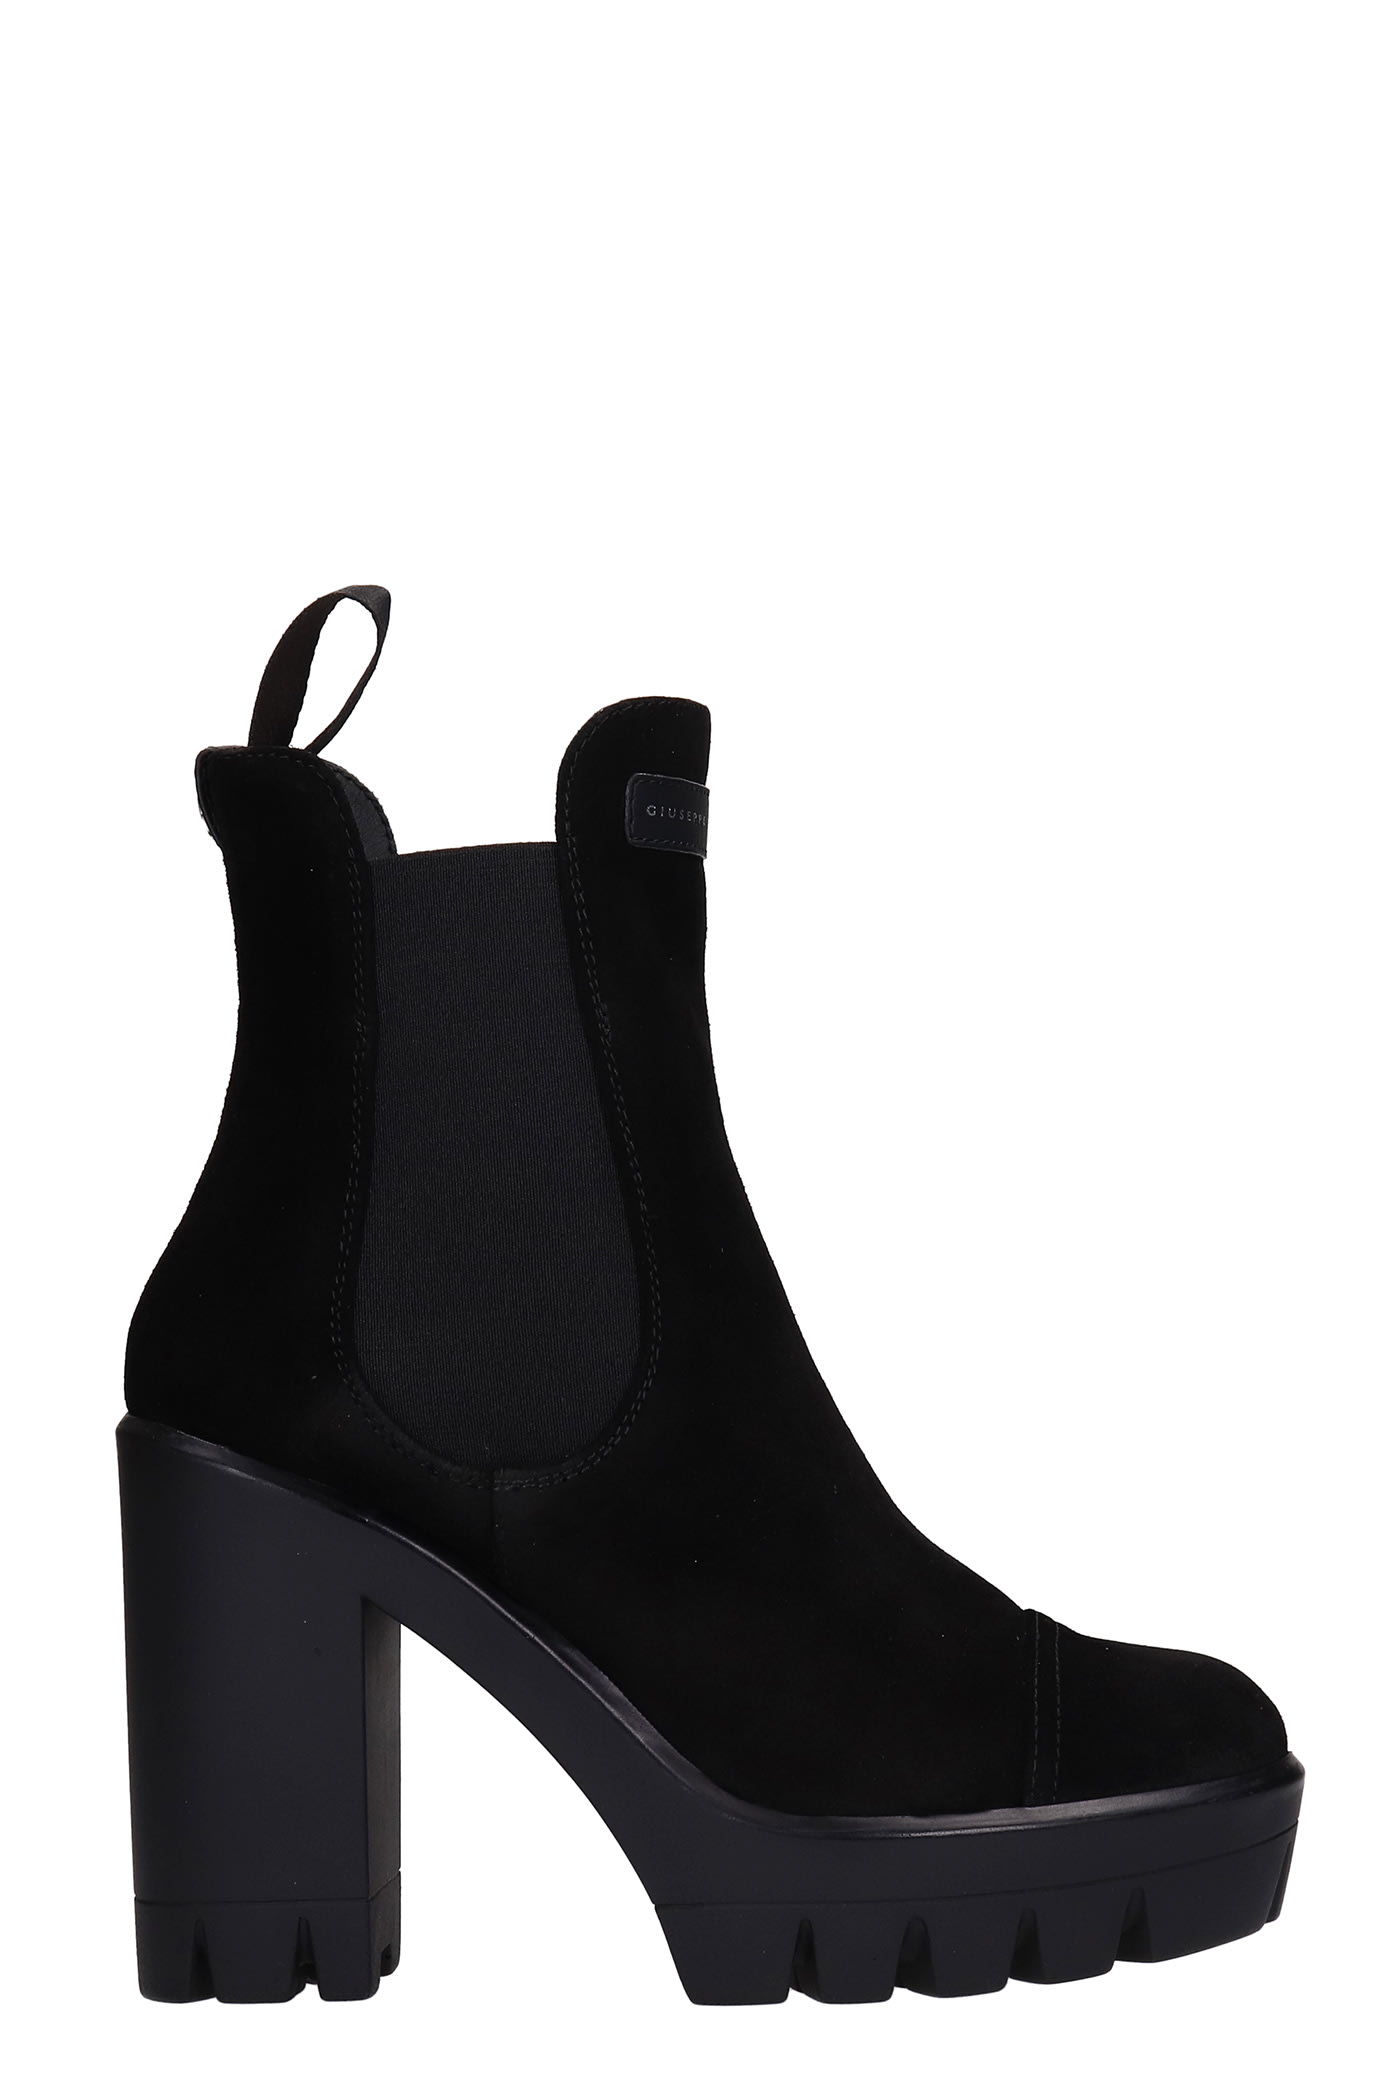 Giuseppe Zanotti Tonix High Heels Ankle Boots In Black Suede